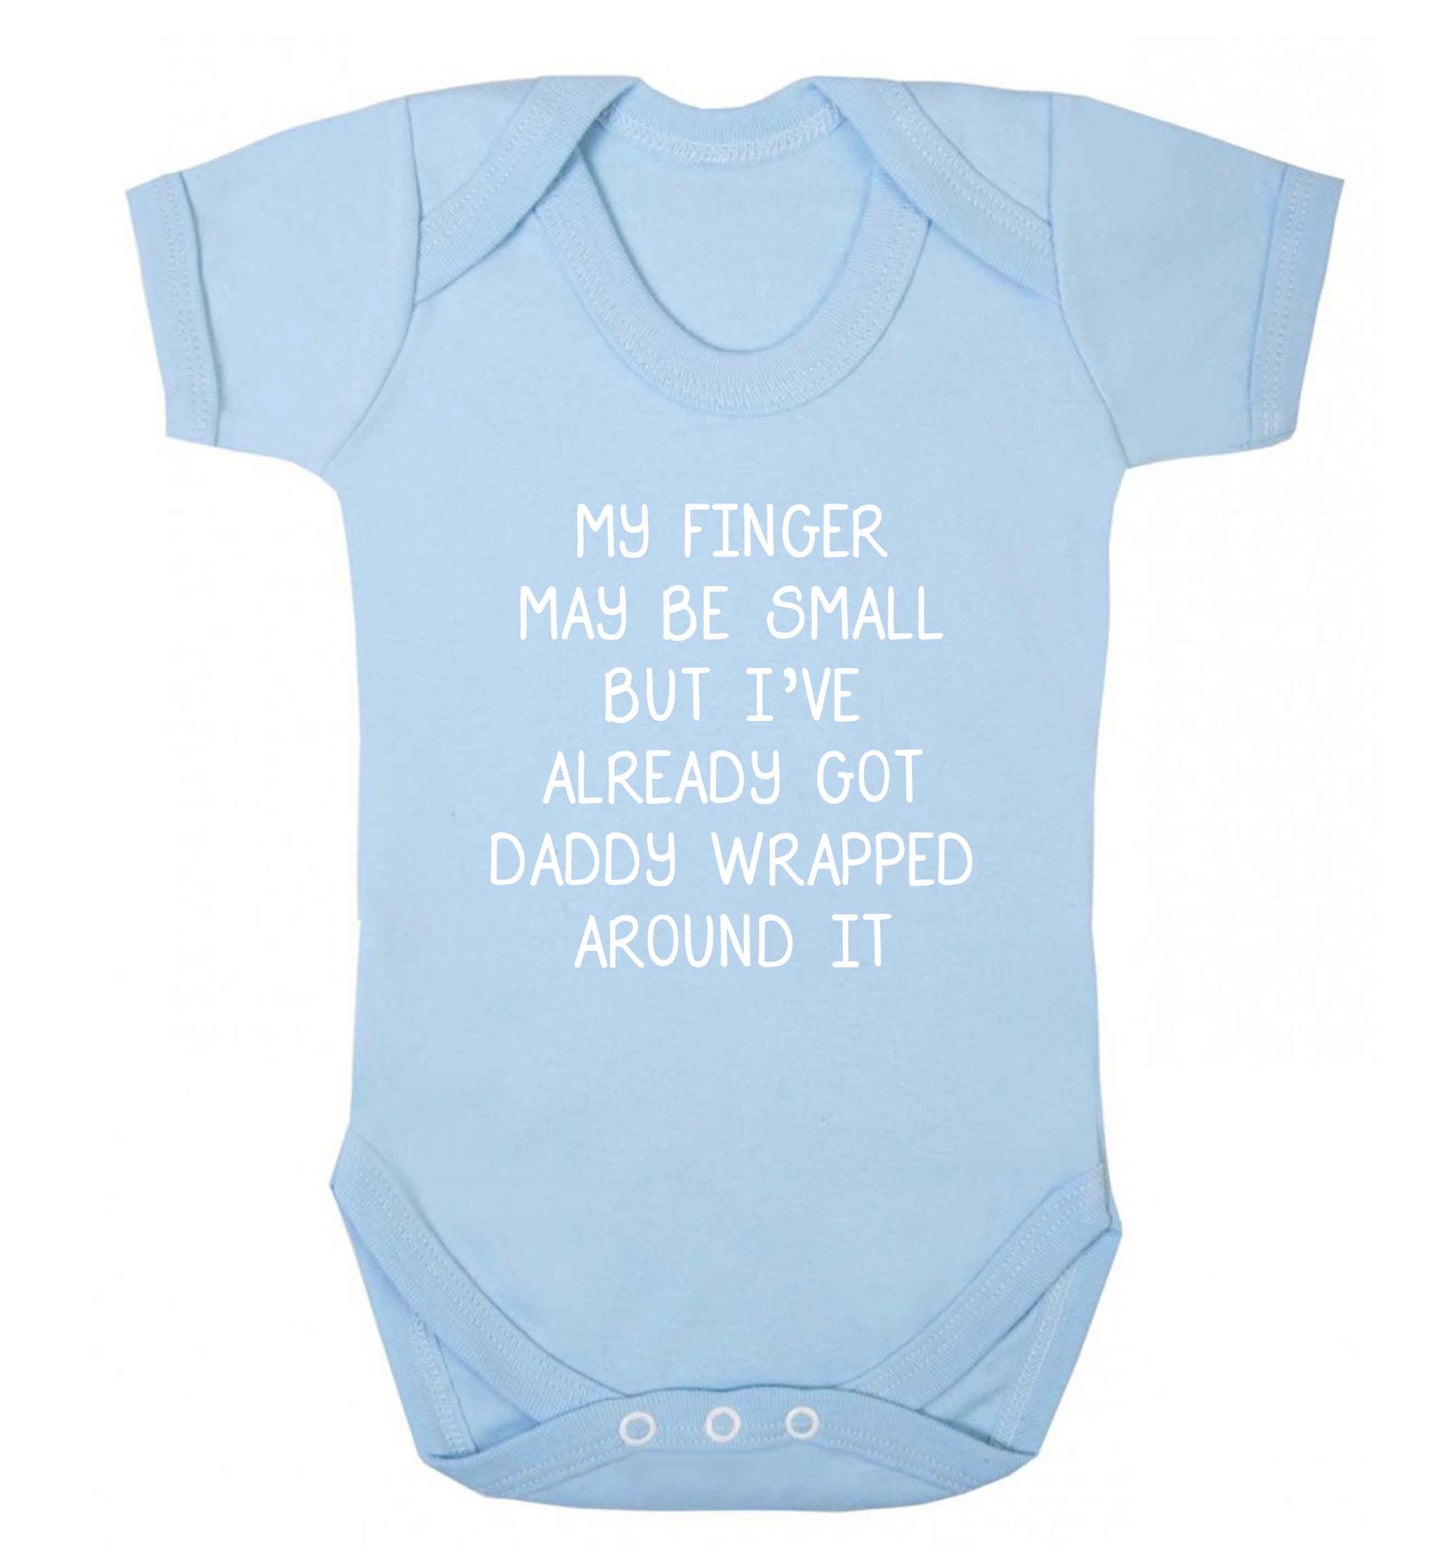 My finger may be small but I've already got daddy wrapped around it baby vest pale blue 18-24 months